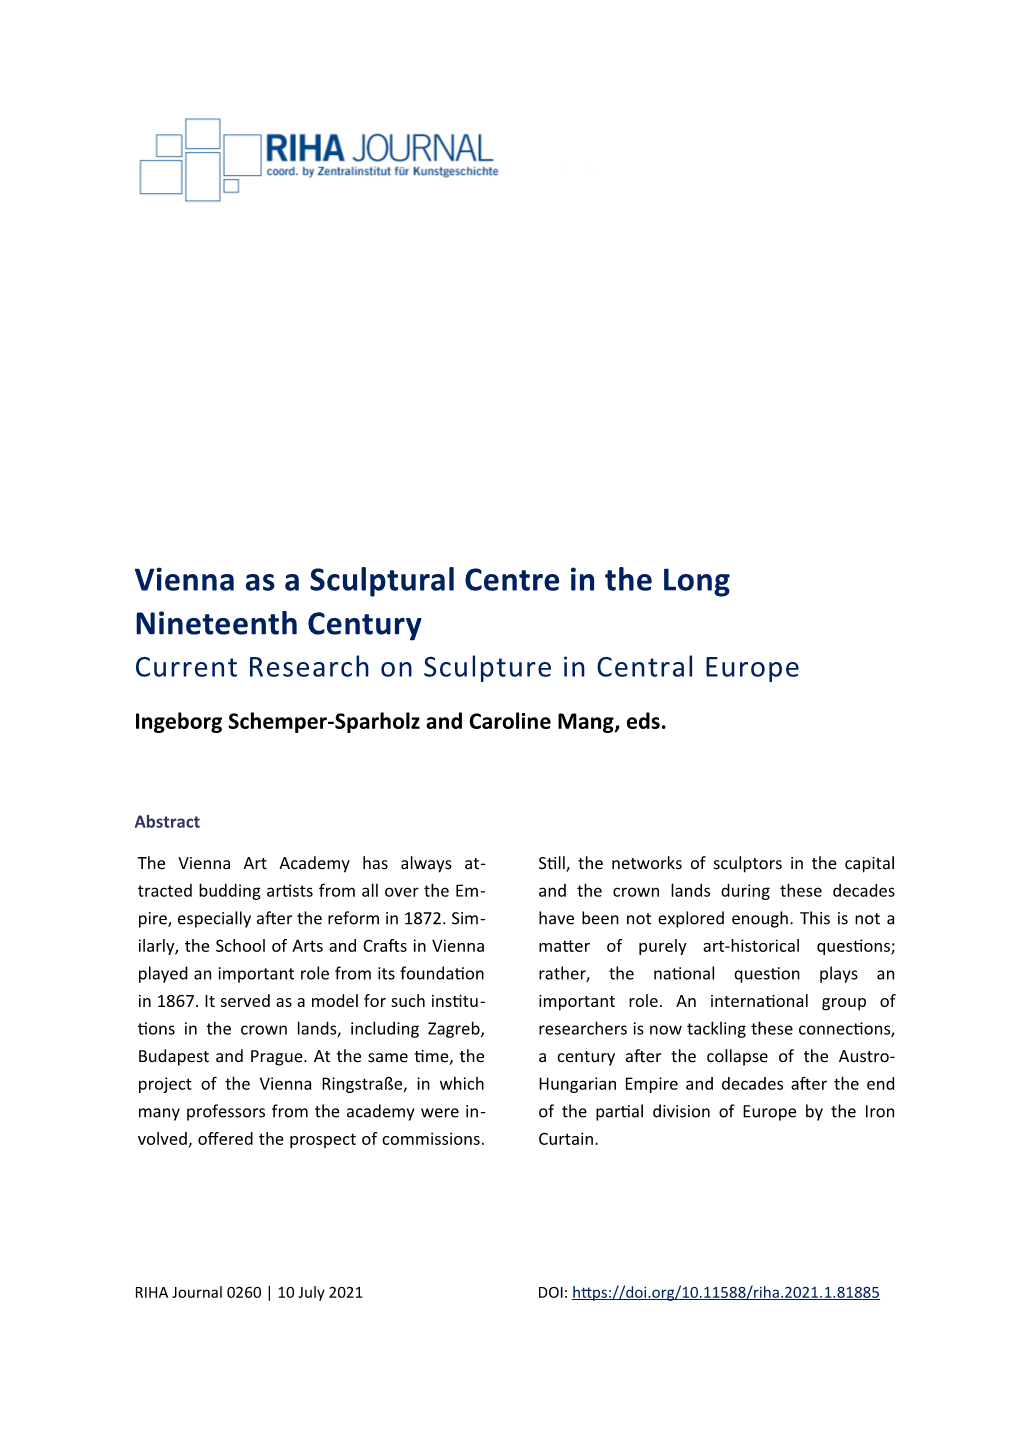 Vienna As a Sculptural Centre in the Long Nineteenth Century Current Research on Sculpture in Central Europe